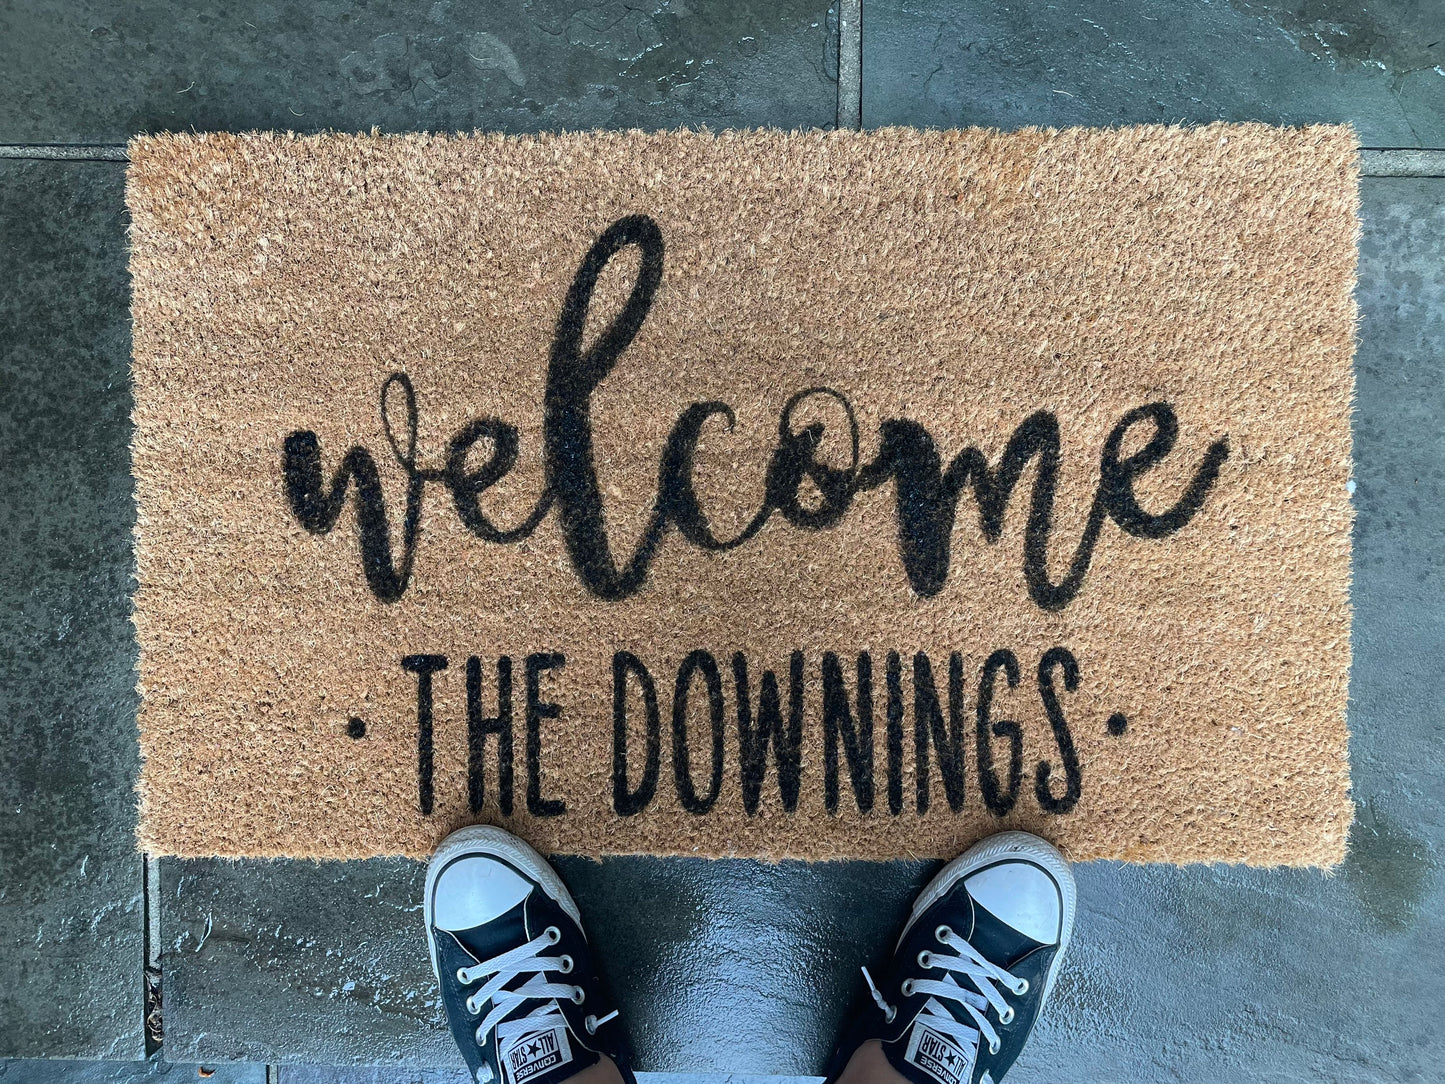 Welcome Mat - Personalized - Design your own - Custom Welcome Mat